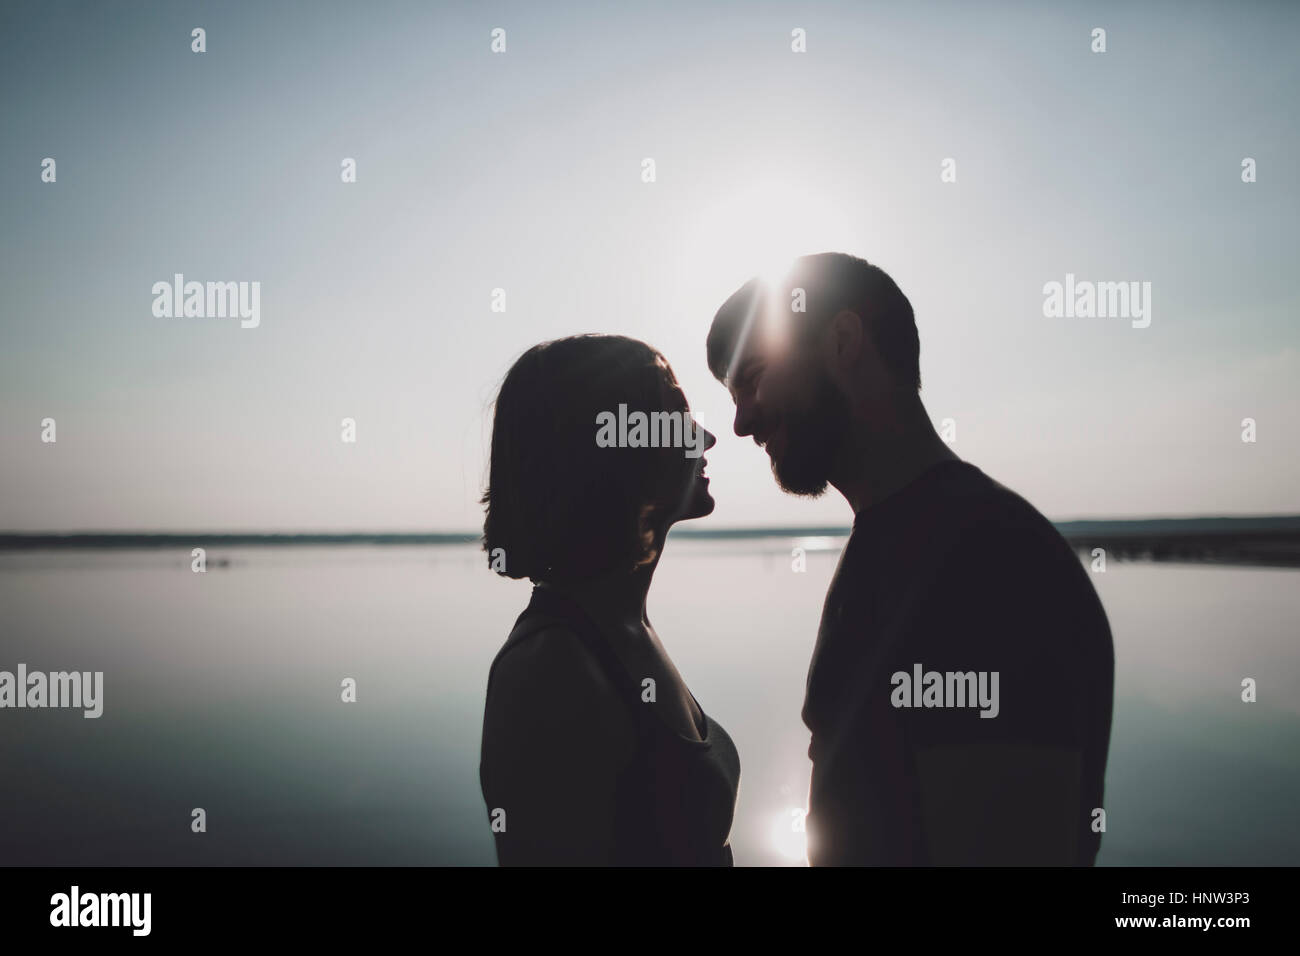 Silhouette of smiling Caucasian couple at lake Stock Photo